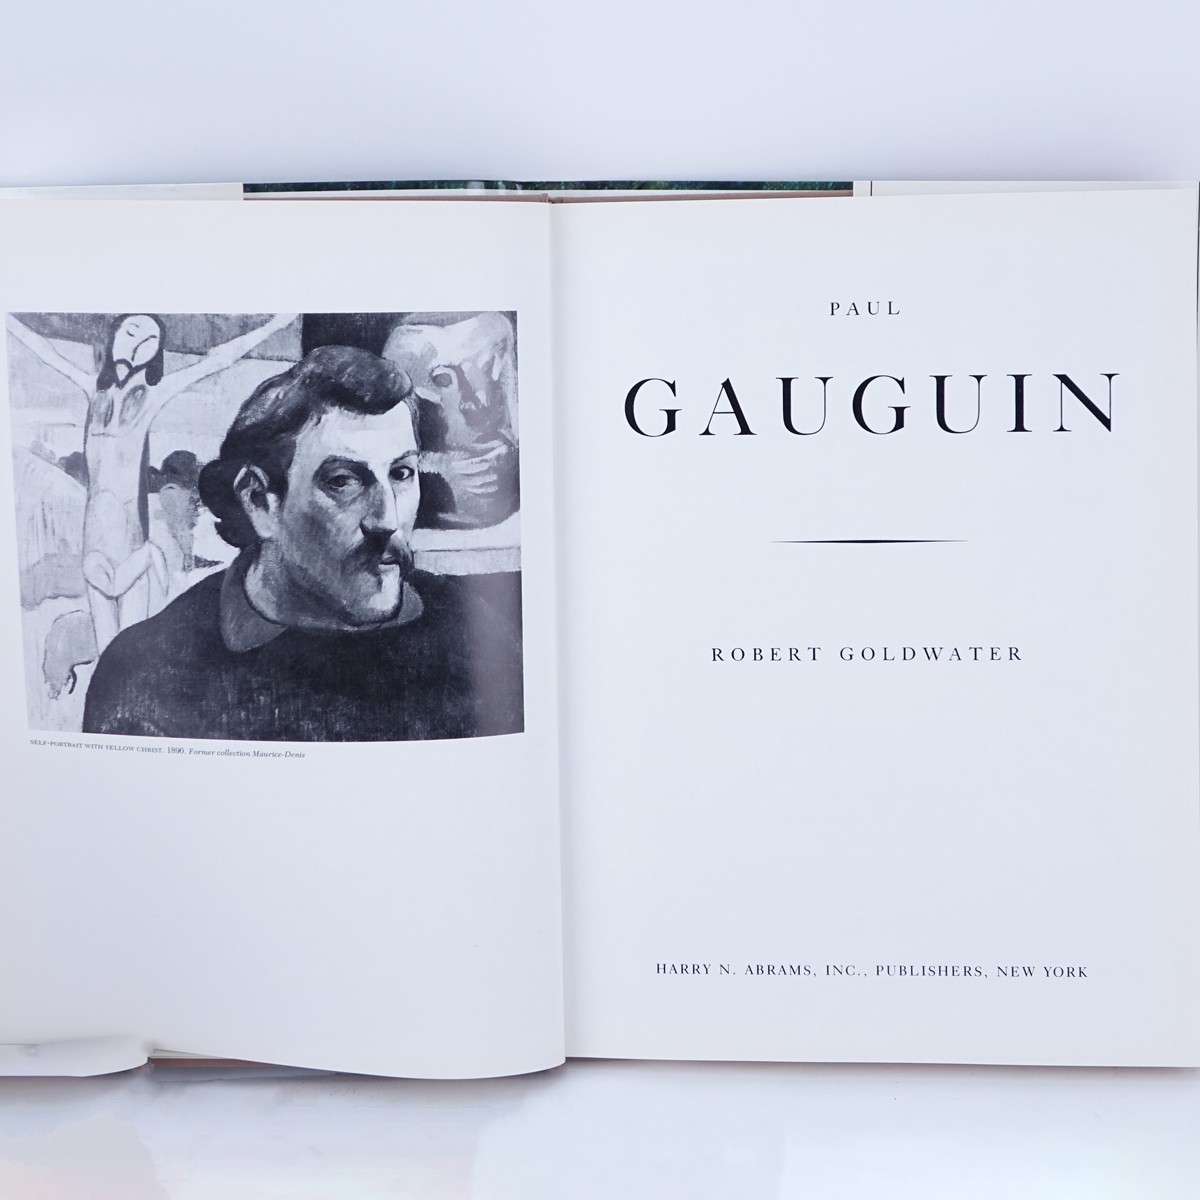 Grouping of Three (3): Paul Gauguin Hardcover book by Robert Coldwater, Paul Gauguin Noa Noa Edition Hardcover Book, and Posters of the Belle Époque: The Wine Spectator Collection Hardcover Book by Jack Rennert. All in good used condition.